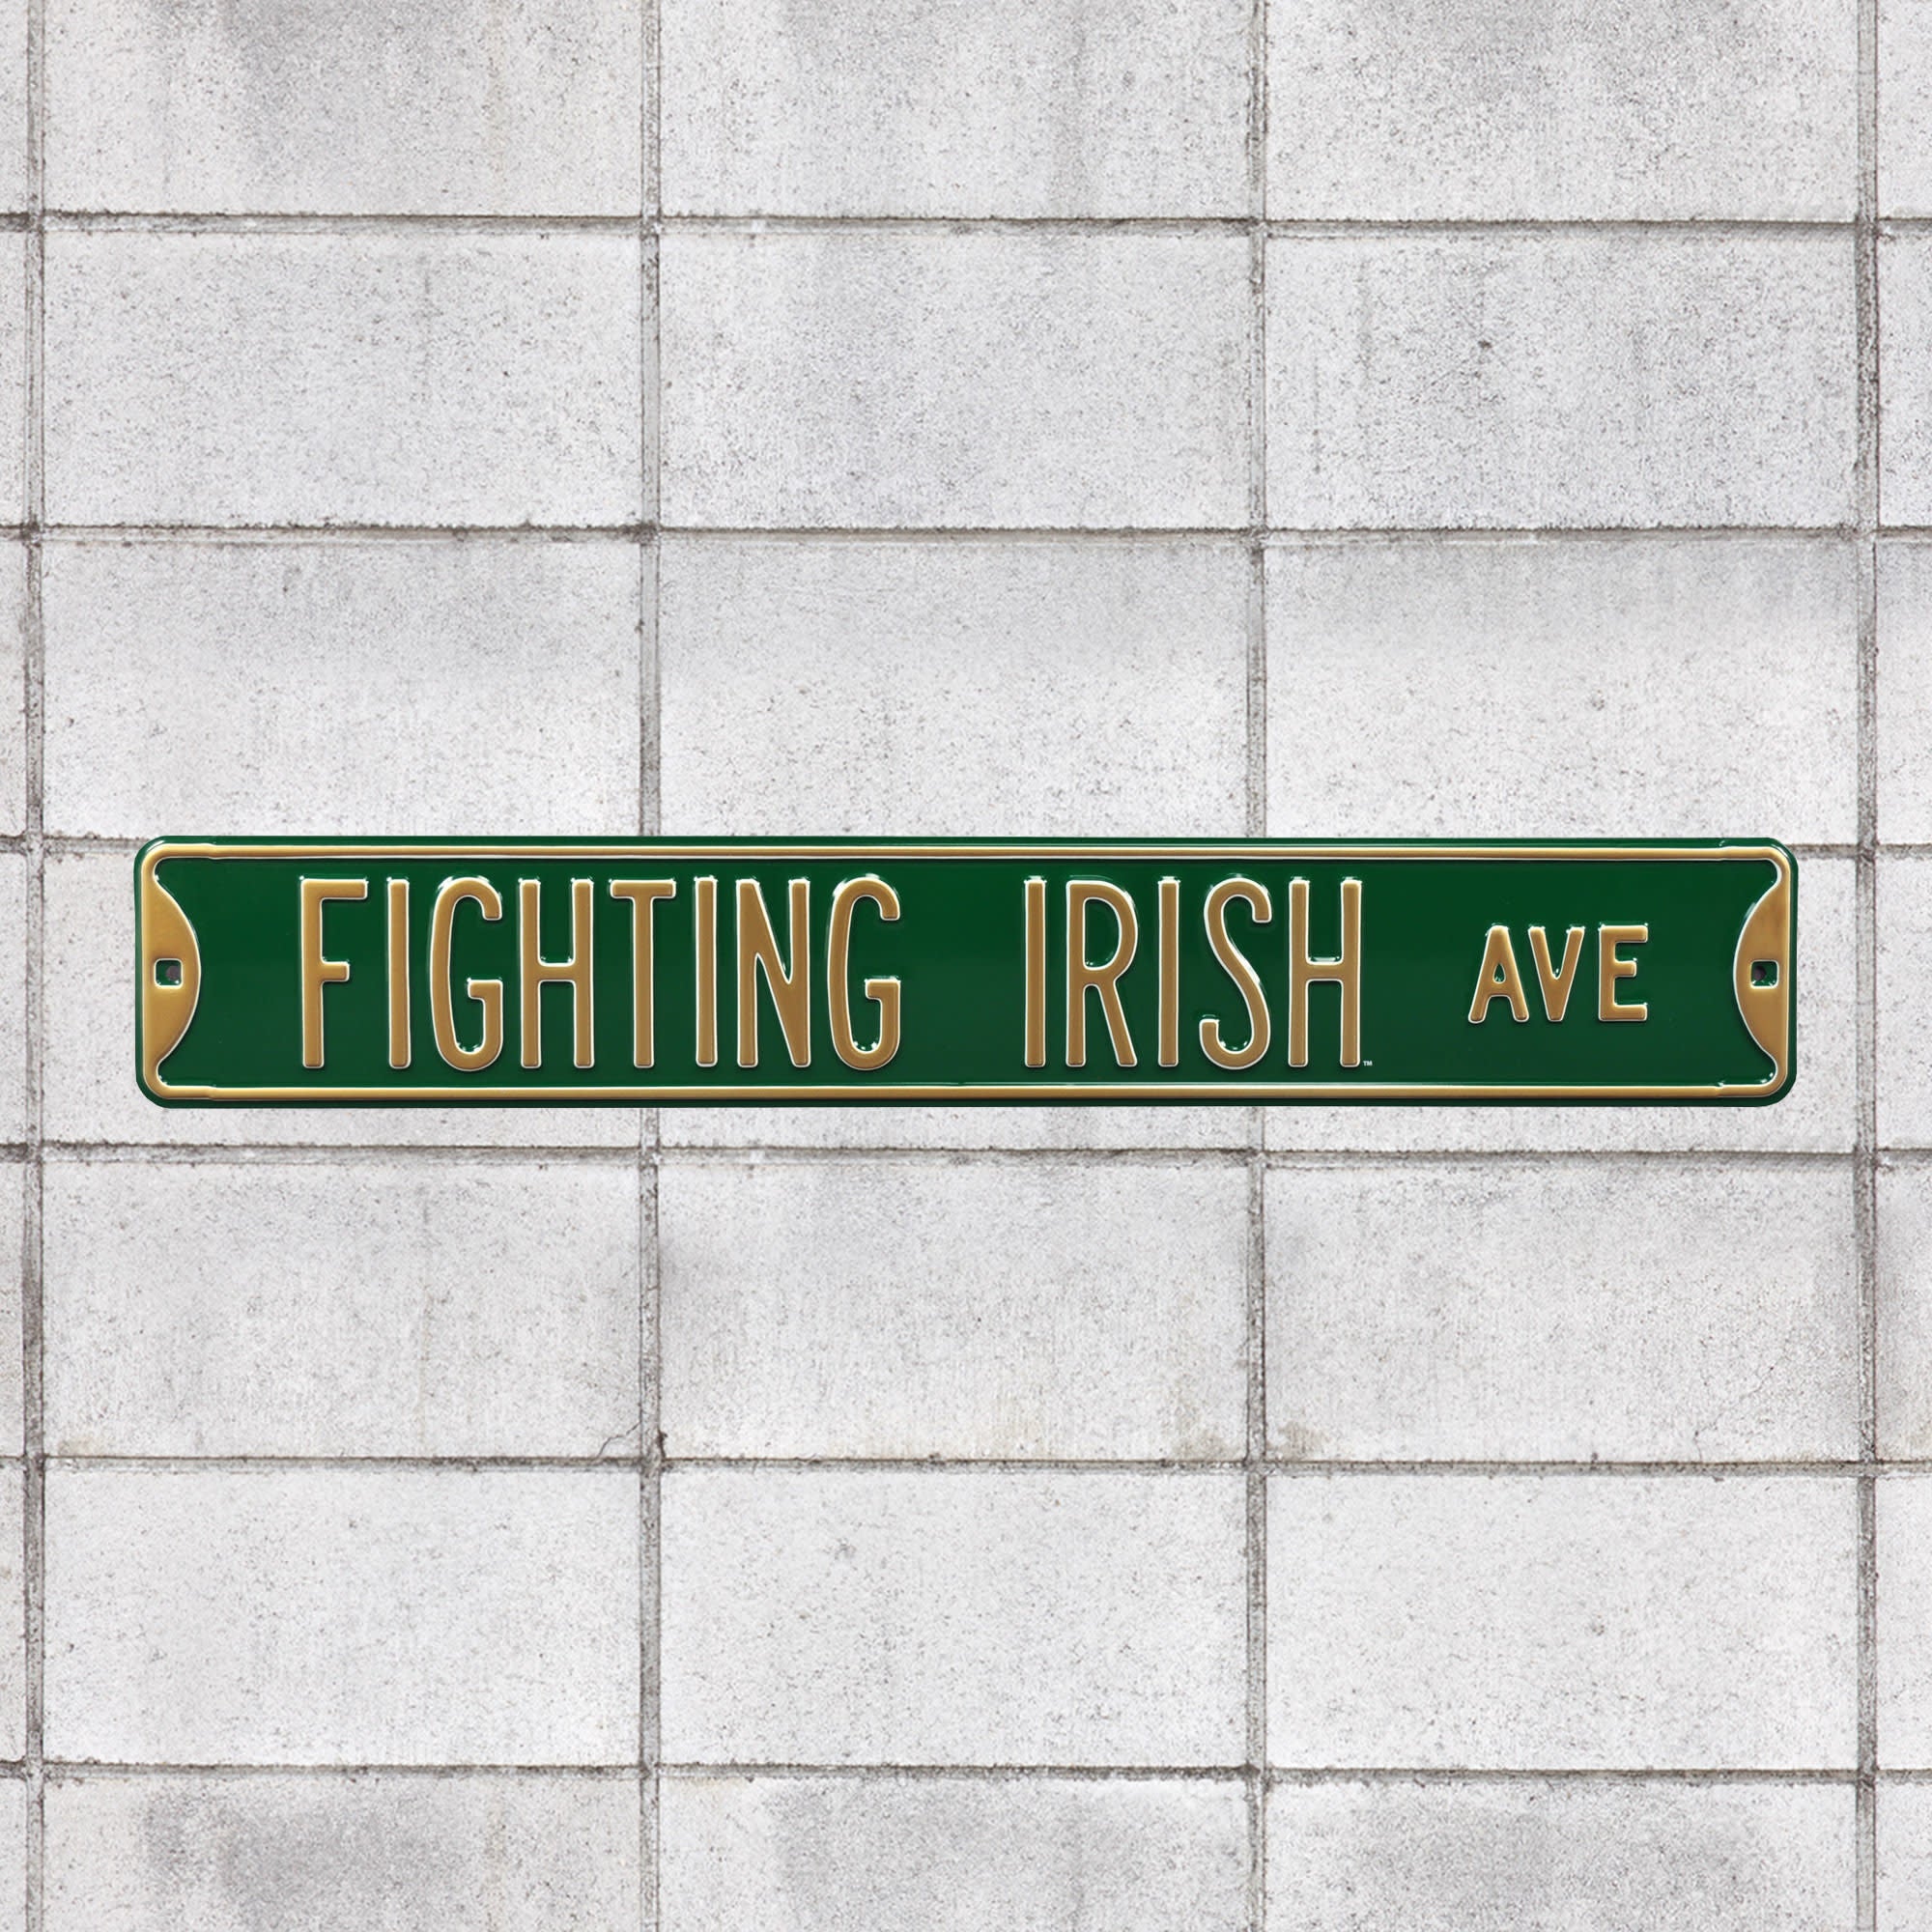 Notre Dame Fighting Irish: Notre Dame Fighting Irish Avenue - Officially Licensed Metal Street Sign 36.0"W x 6.0"H by Fathead |